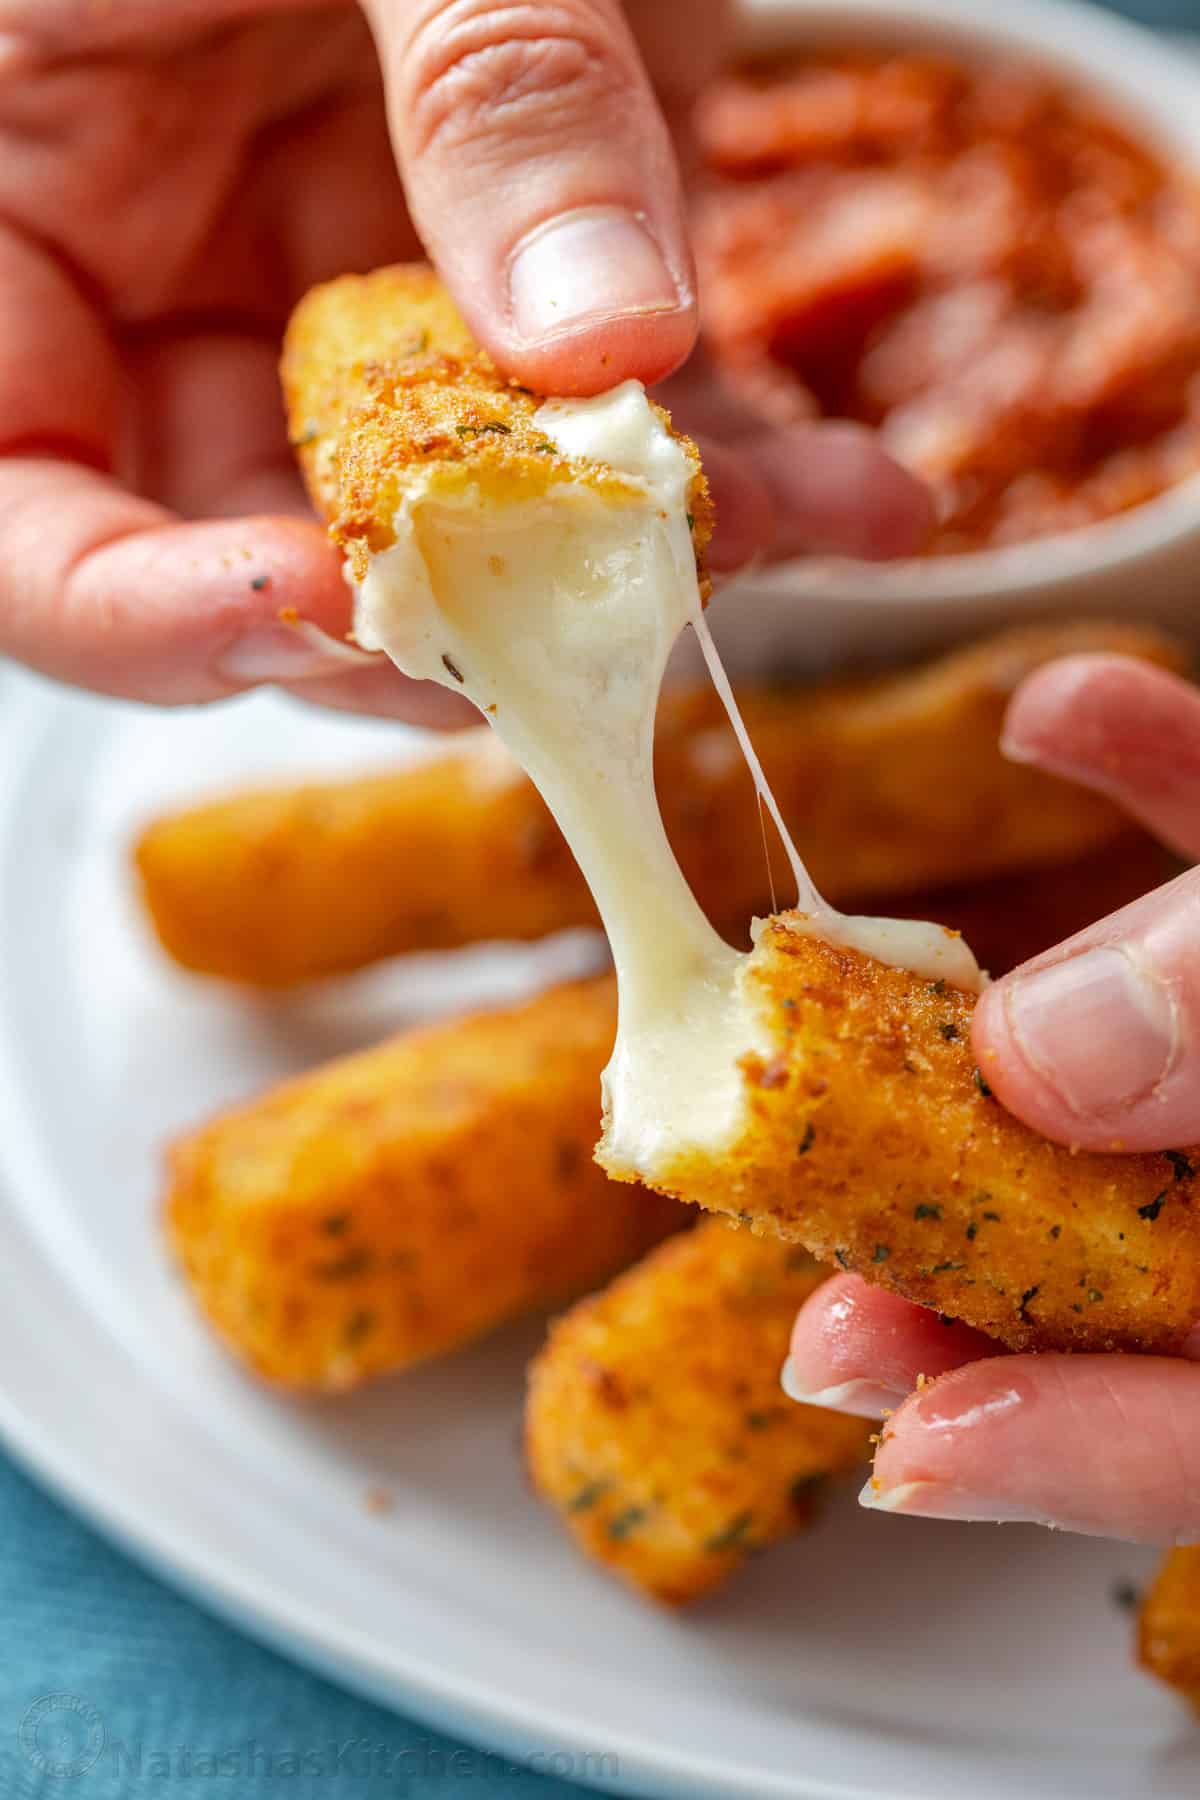 Two hands pulling apart a mozzarella stick with a plate of cheese sticks in the background.